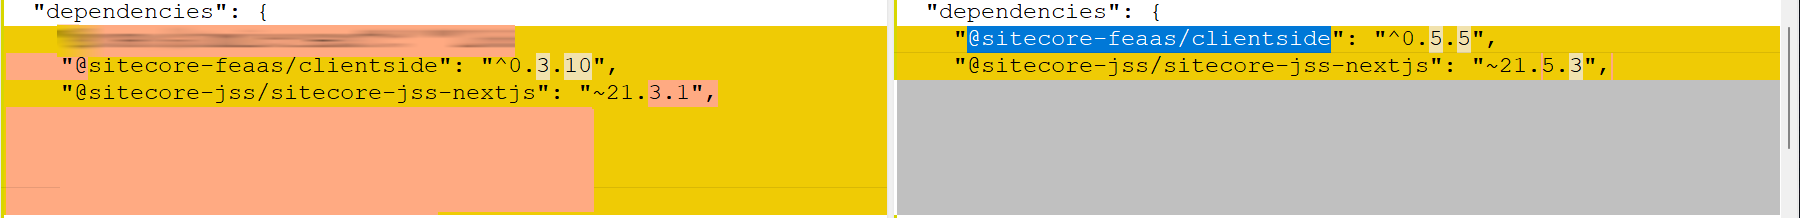 Side-by-side comparison of JSON files highlighting updated dependencies for web development packages.